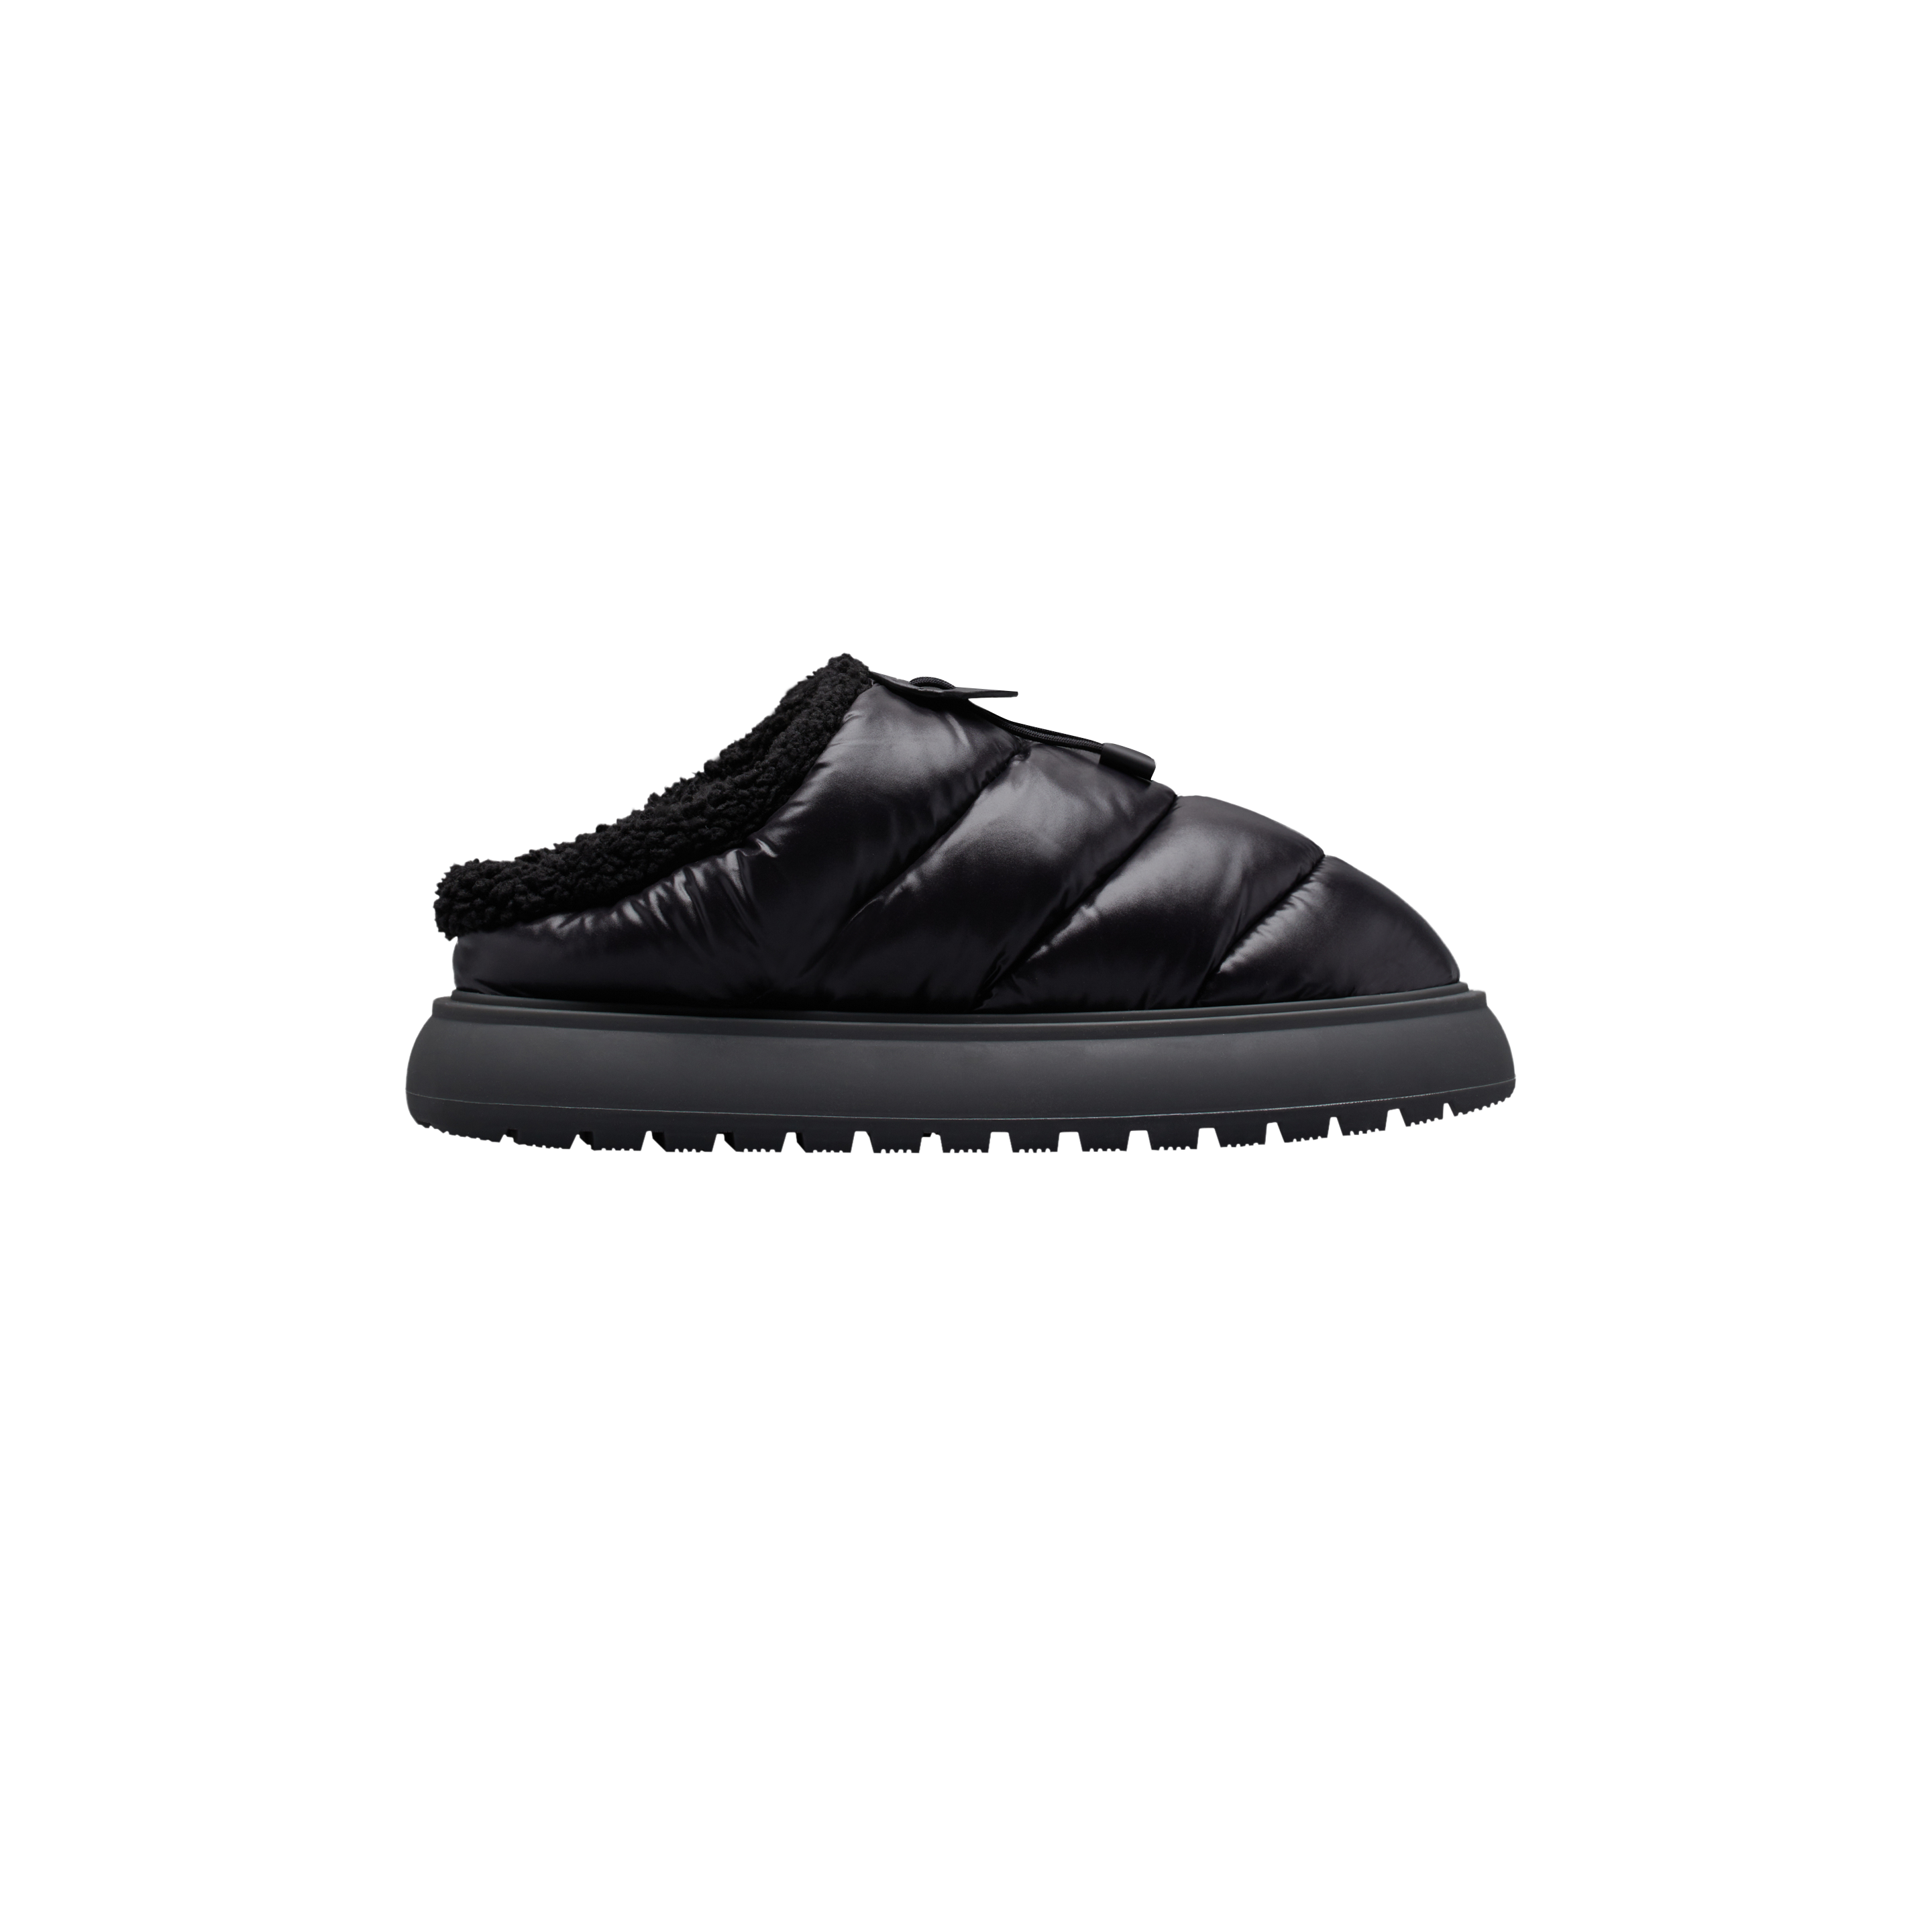 Moncler Collection Gaia Slippers Black Size 37